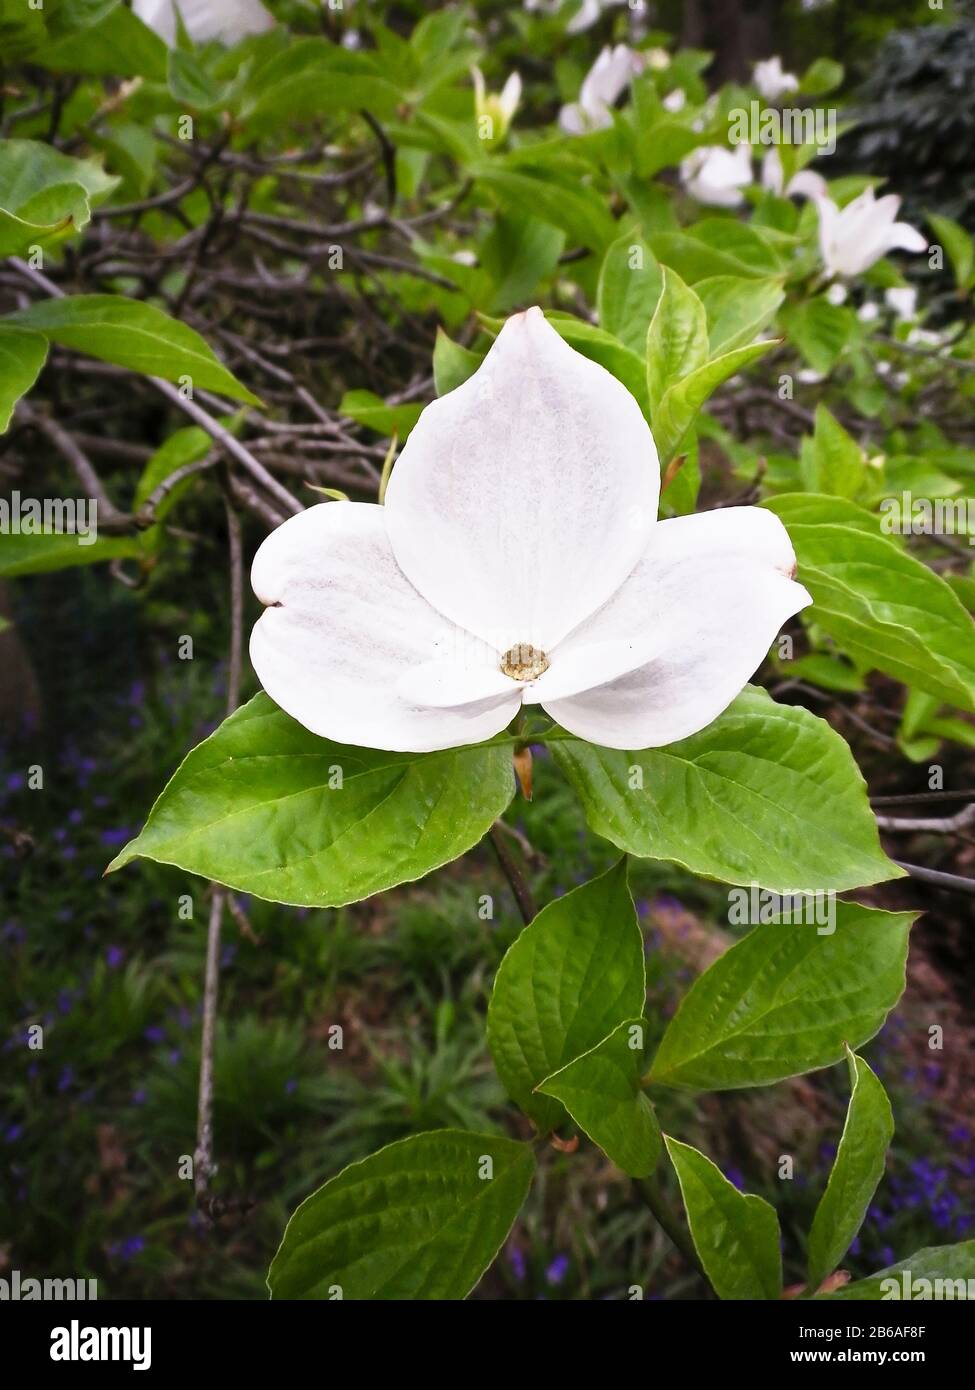 Cornus Eddie's White Wonder showing a typical white four petalled or more correctly  bracts of this spectacular deciduous tree in Bowood woods Stock Photo